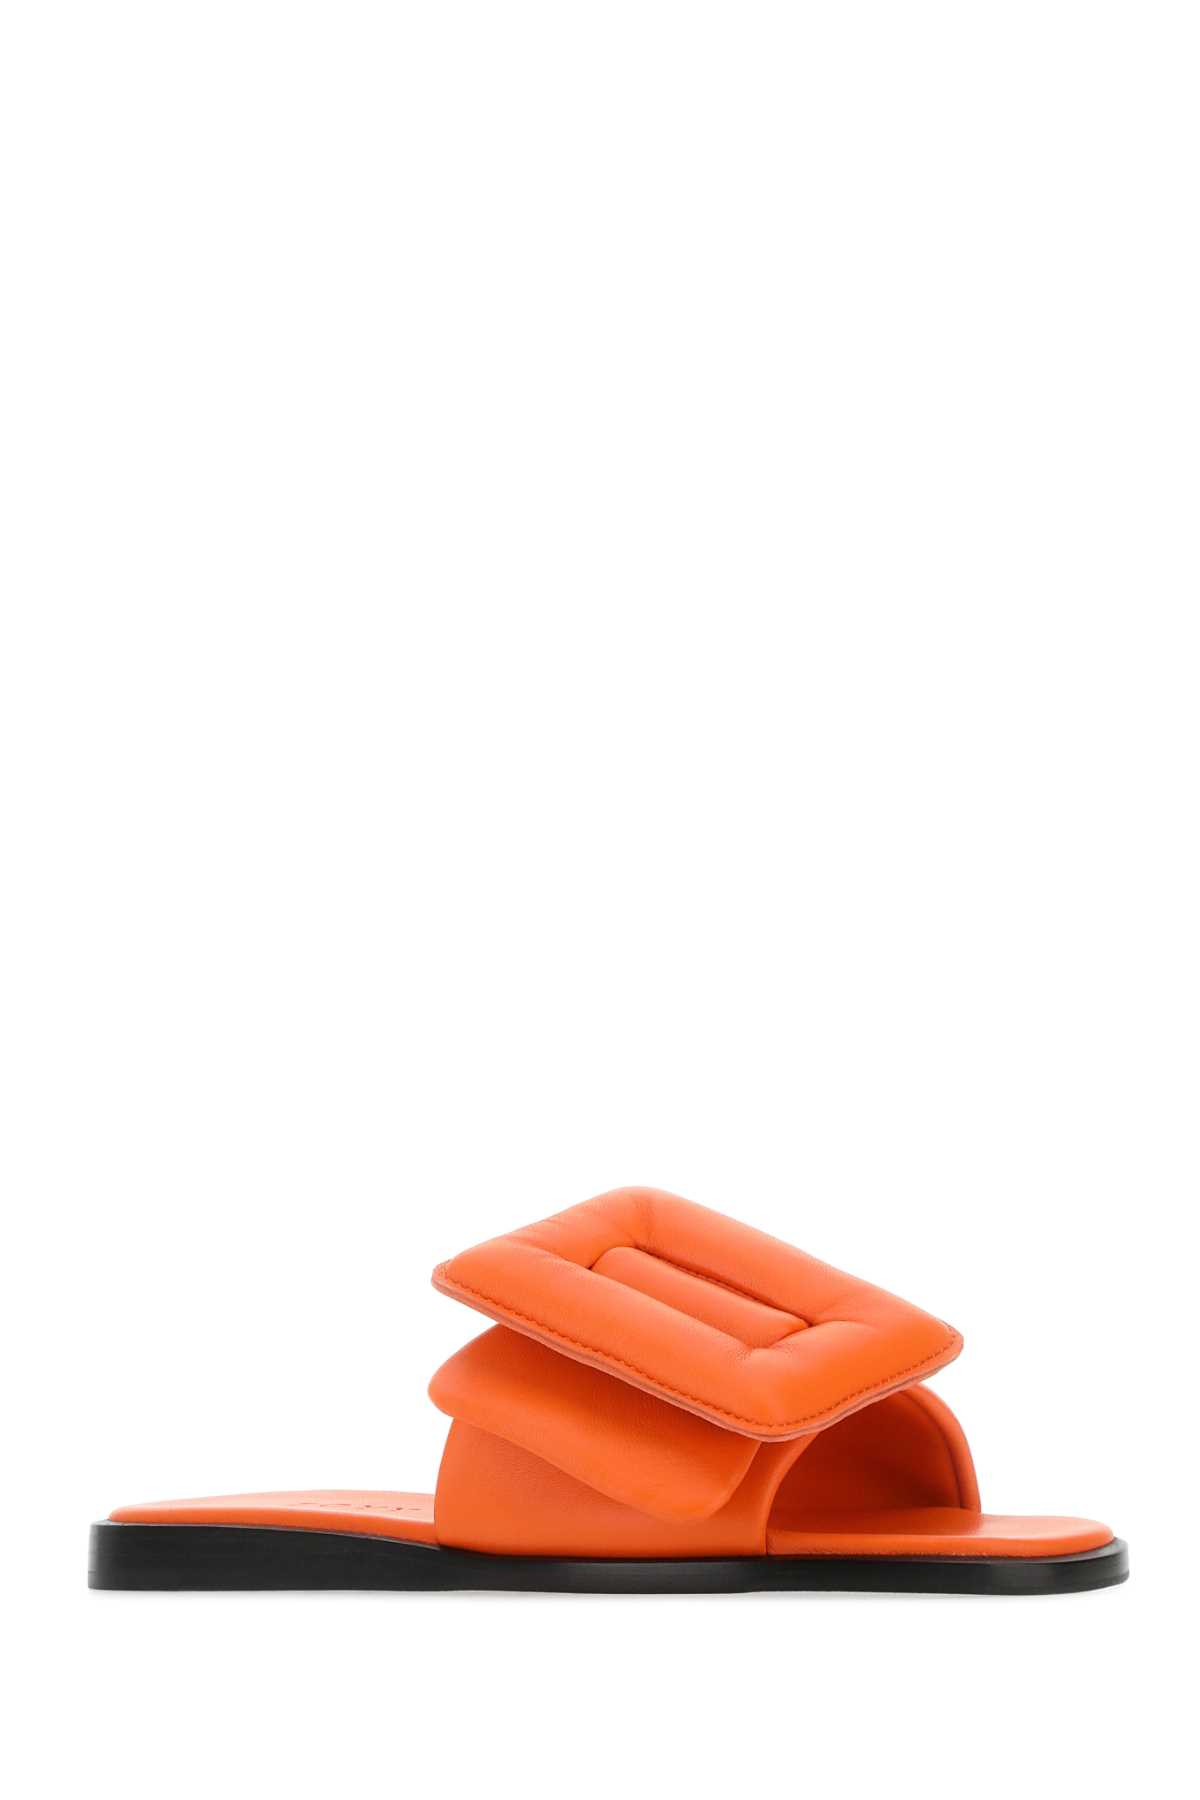 Shop Boyy Orange Leather Puffy Slippers In Puffinsbill